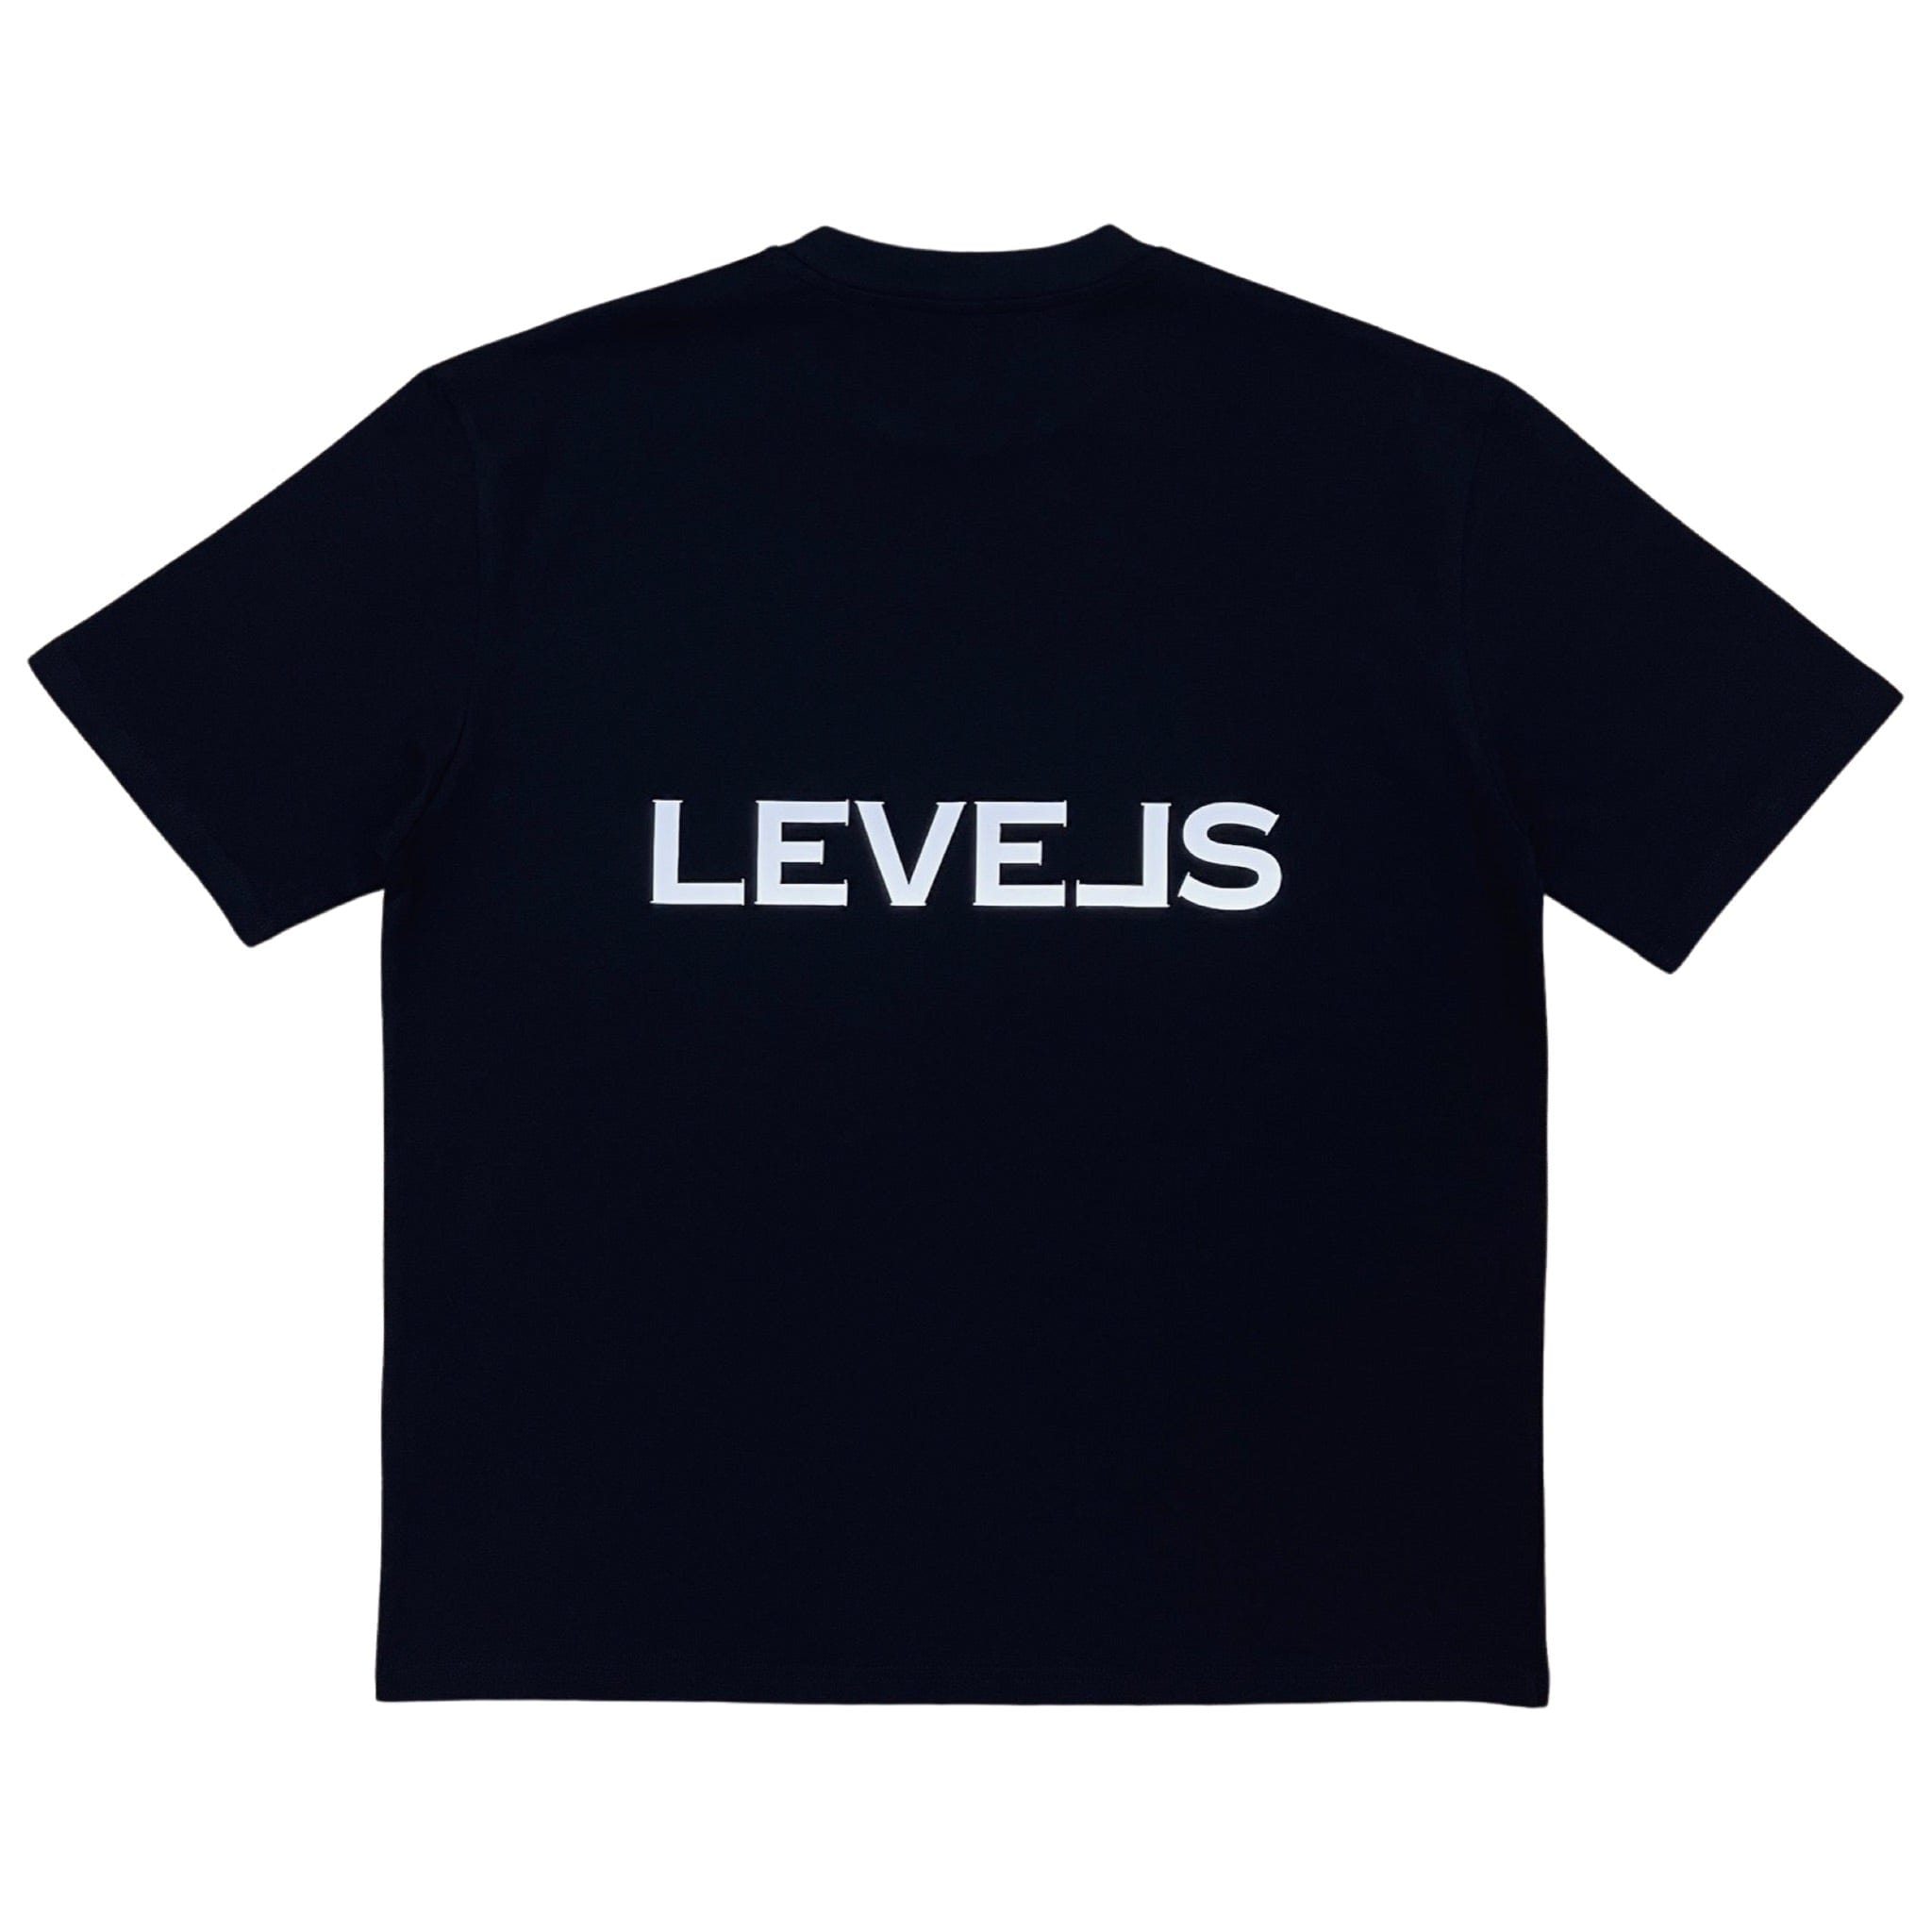 LEVELS, LLC Apparel & Accessories LUX LEVELS OVERSIZED REFLECTIVE TEE (BLACK)